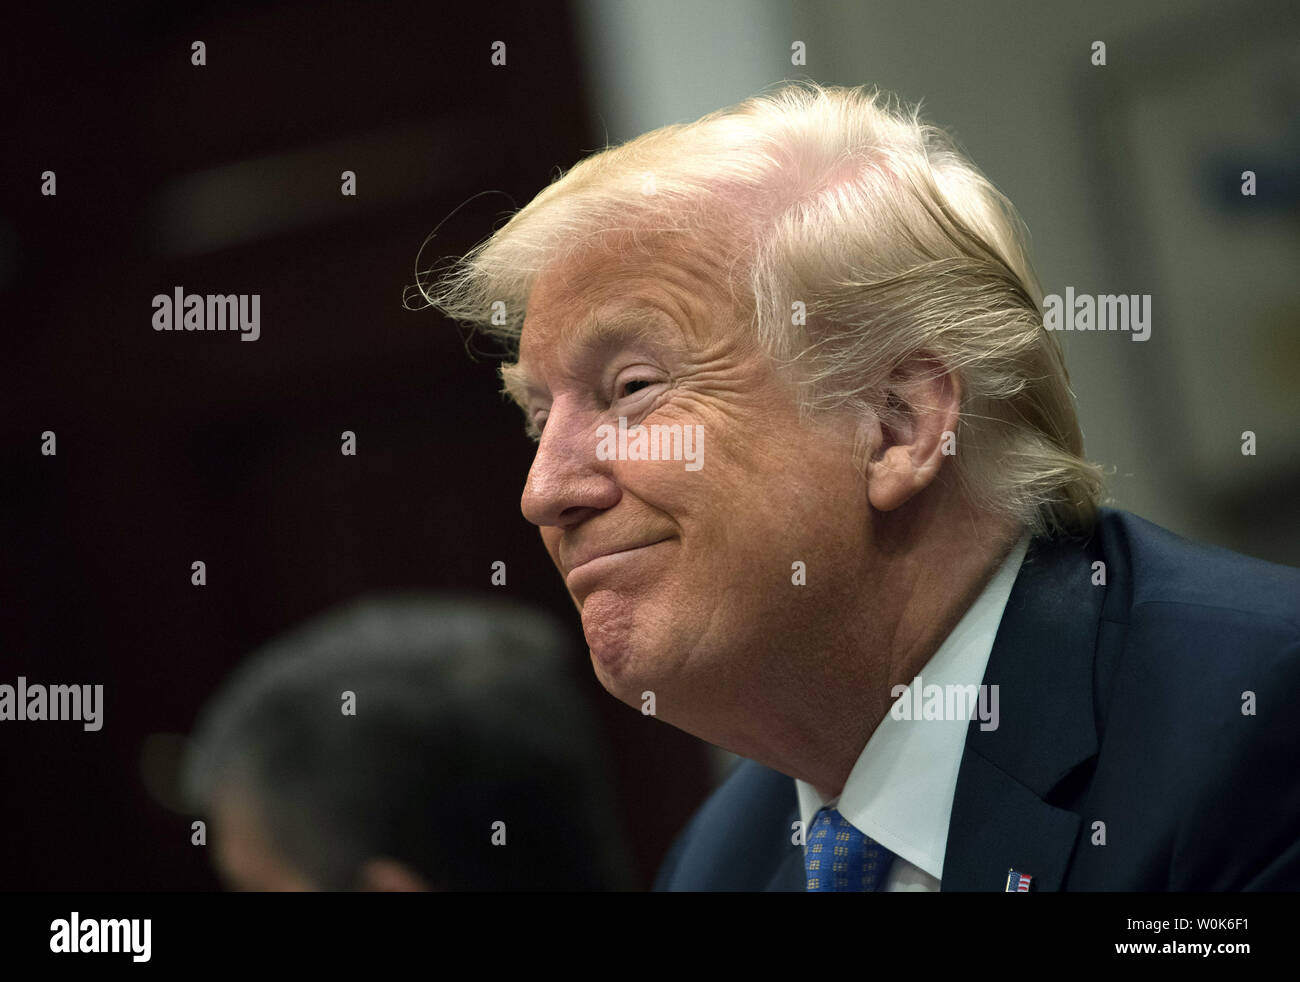 President Donald Tump speaks to the media during a roundtable on the Foreign Investment Risk Review Modernization Act, at the White House in Washington, D.C. on August 23, 2018.  Photo by Kevin Dietsch/UPI Stock Photo